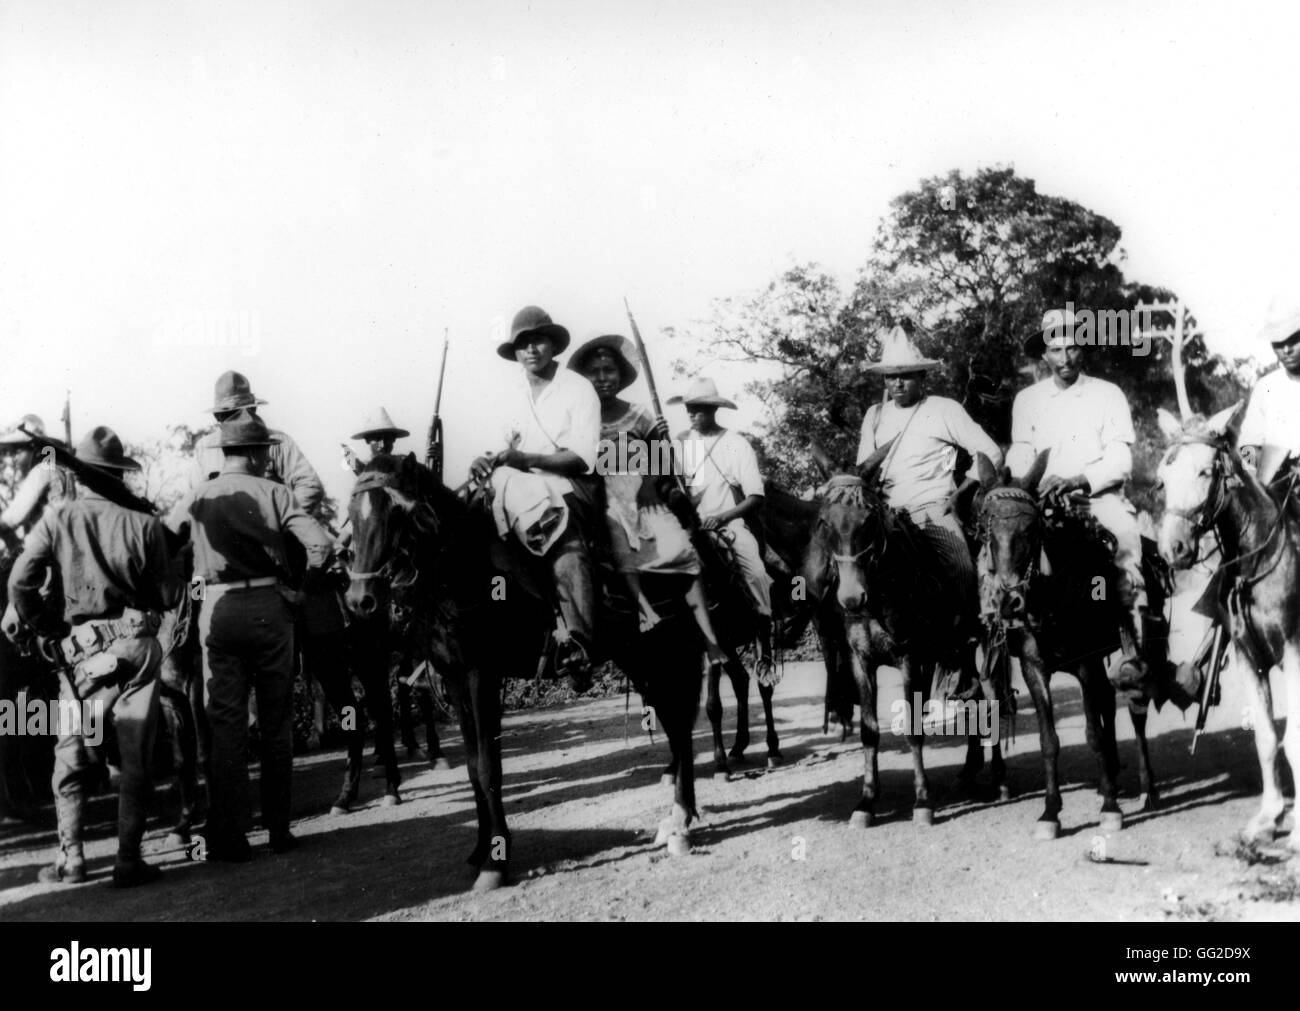 Liberal troops arrested and disarmed by American marines 1927 Nicaragua Washington, D.C. National Archives Stock Photo